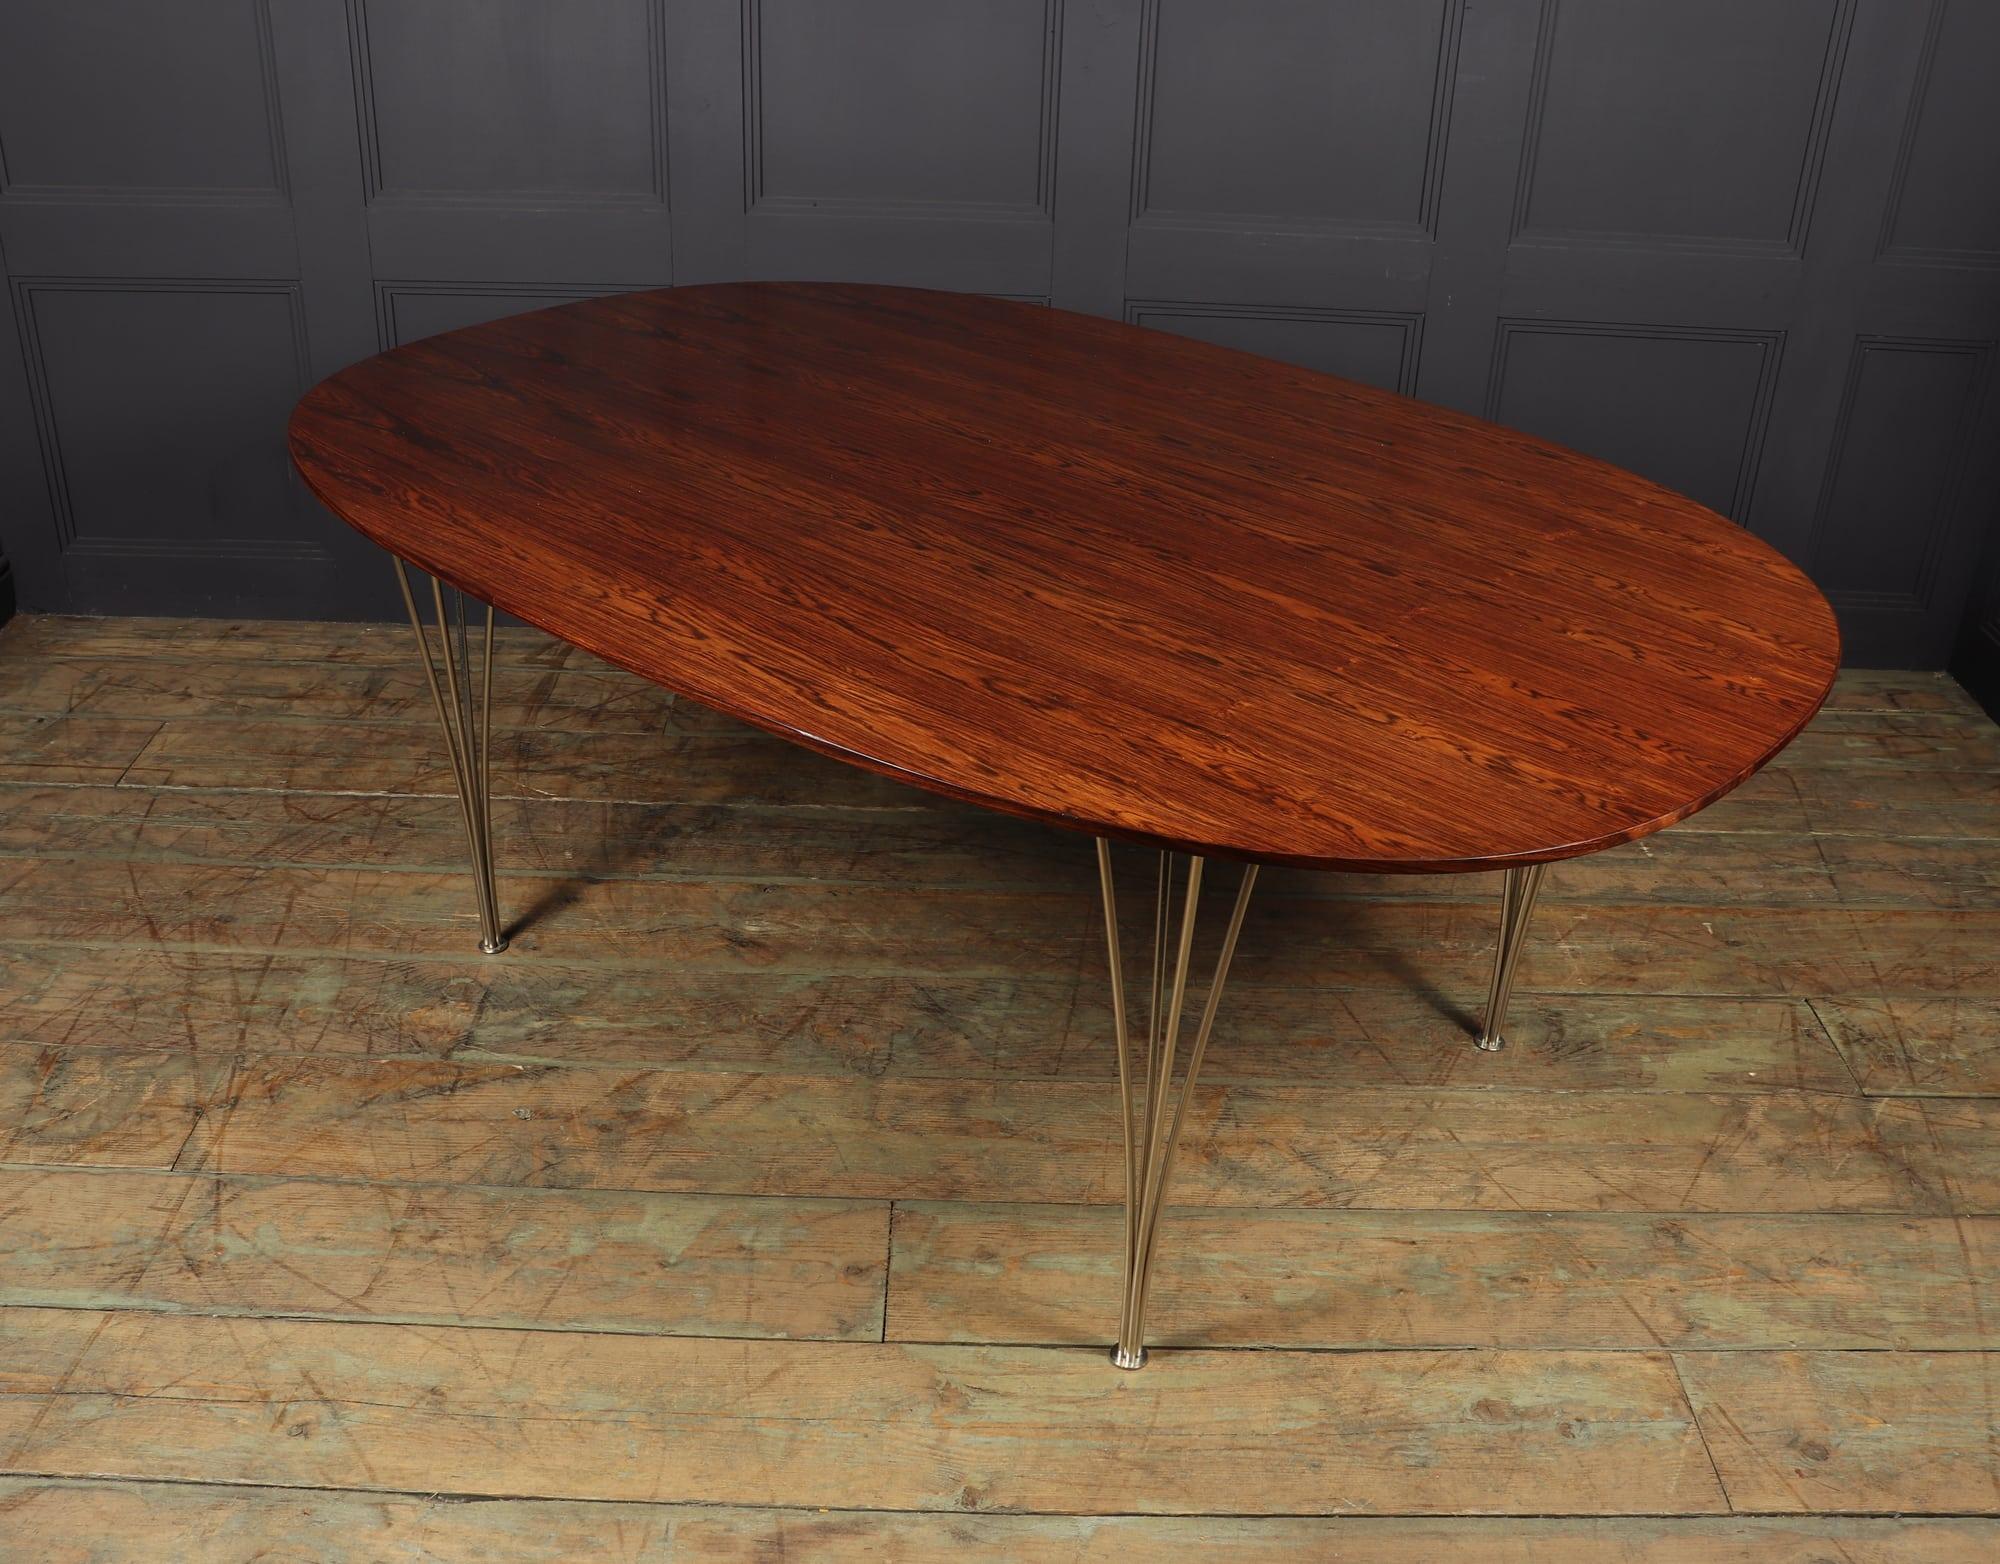 Super Elliptical Dining Table by Piet Hein and Bruno Matheson c1960 1